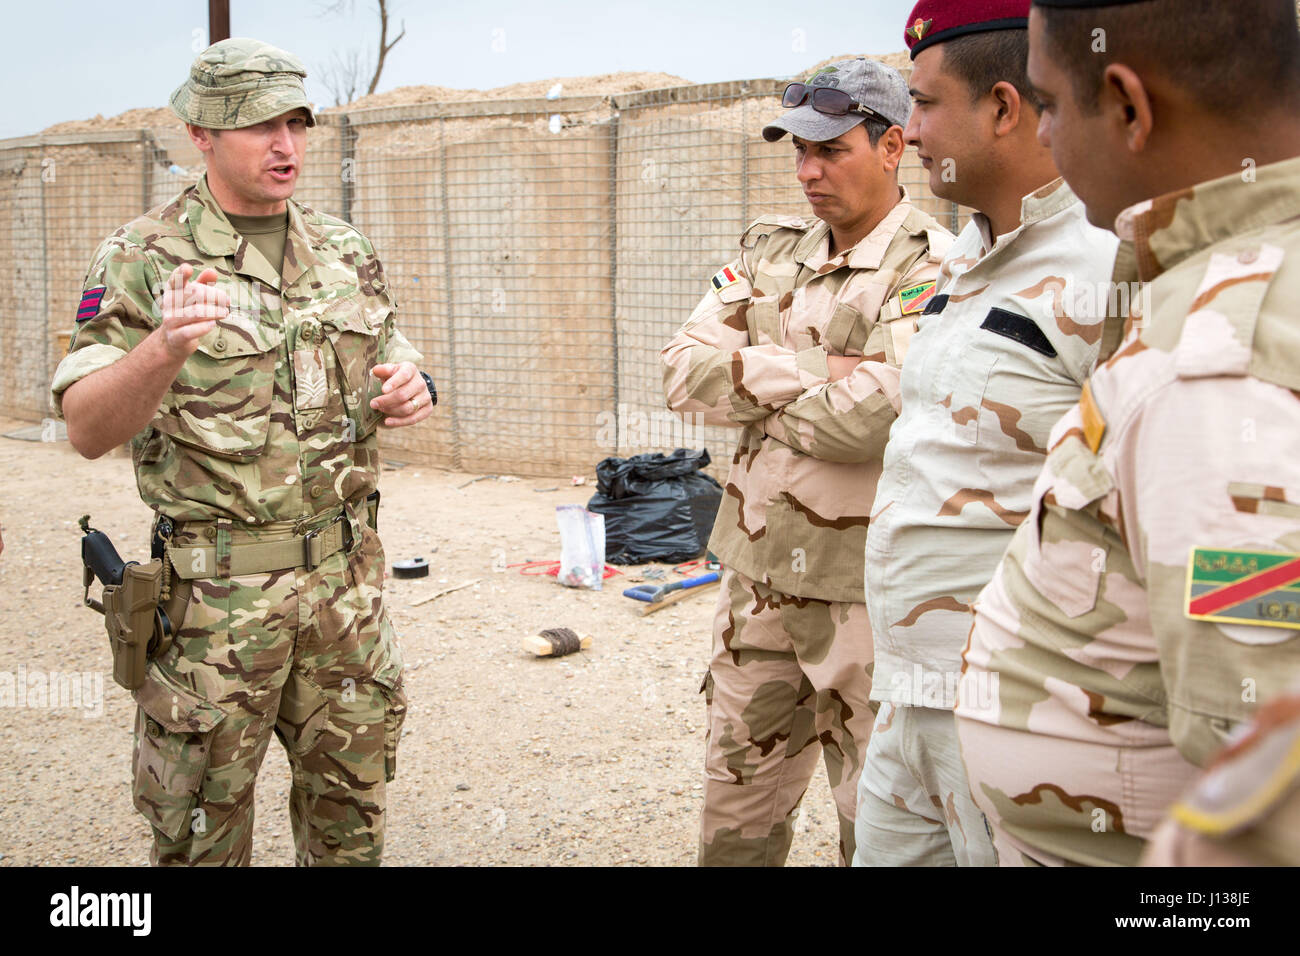 A British army explosive ordinance disposal soldier, deployed in support of Combined Joint Task Force – Operation Inherent Resolve and assigned to 2nd Battalion, Duke of Lancaster Regiment, gives Iraqi security forces soldiers a safety brief before configuring disruption charges during counter-improvised explosive device  training at Camp Taji, Iraq, April 9, 2017.   This training is part of the overall Combined Joint Task Force – Operation Inherent Resolve building partner capacity mission by training and improving the capability of partnered forces fighting ISIS. CJTF-OIR is the global Coali Stock Photo